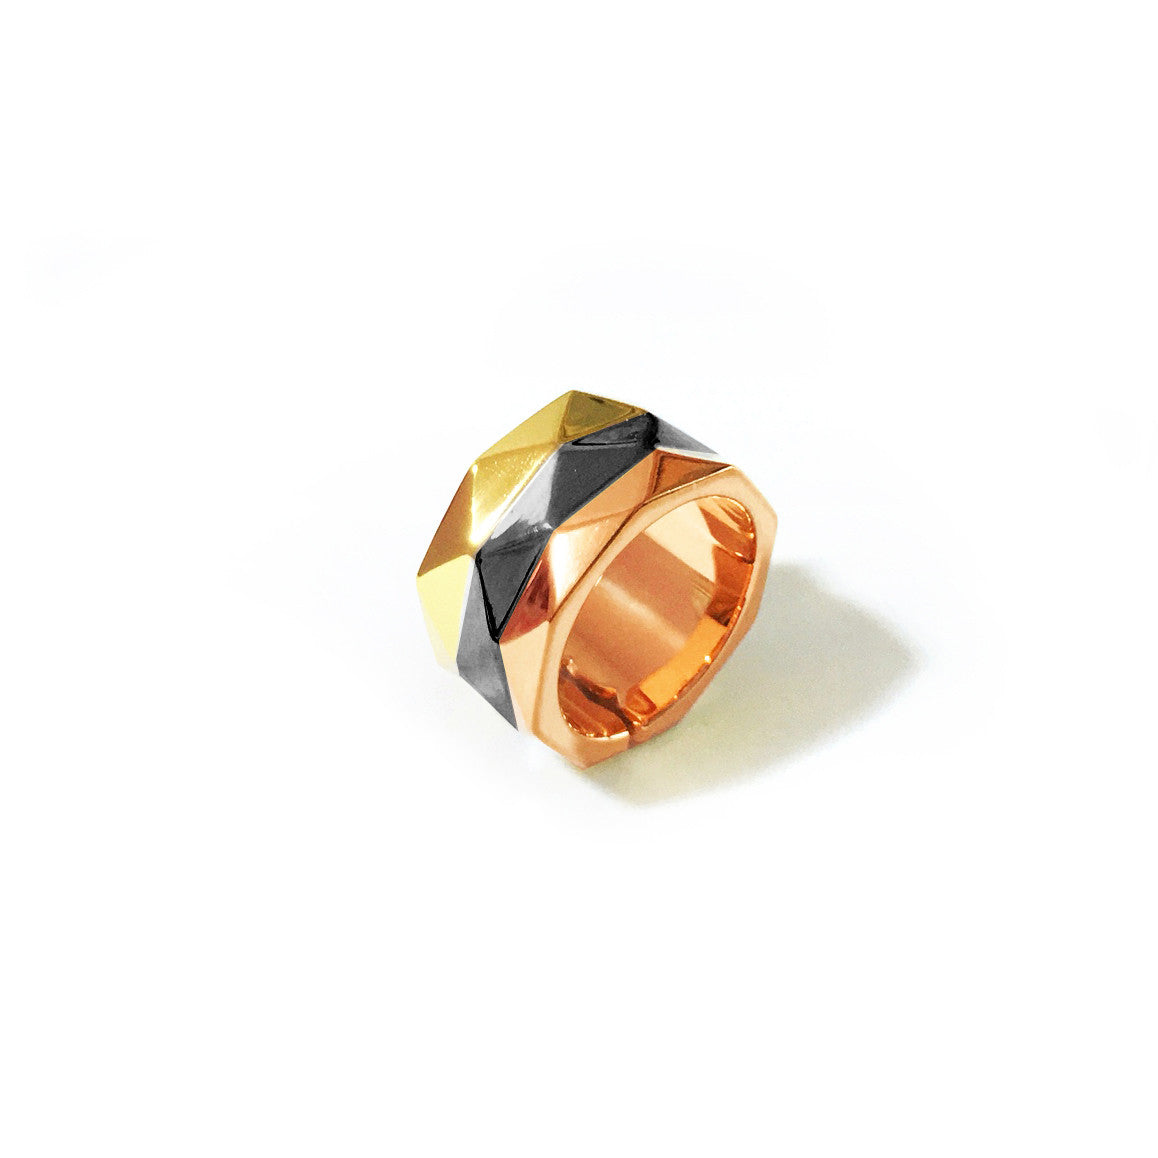 Colour Block Facets Ring - Chainless Brain